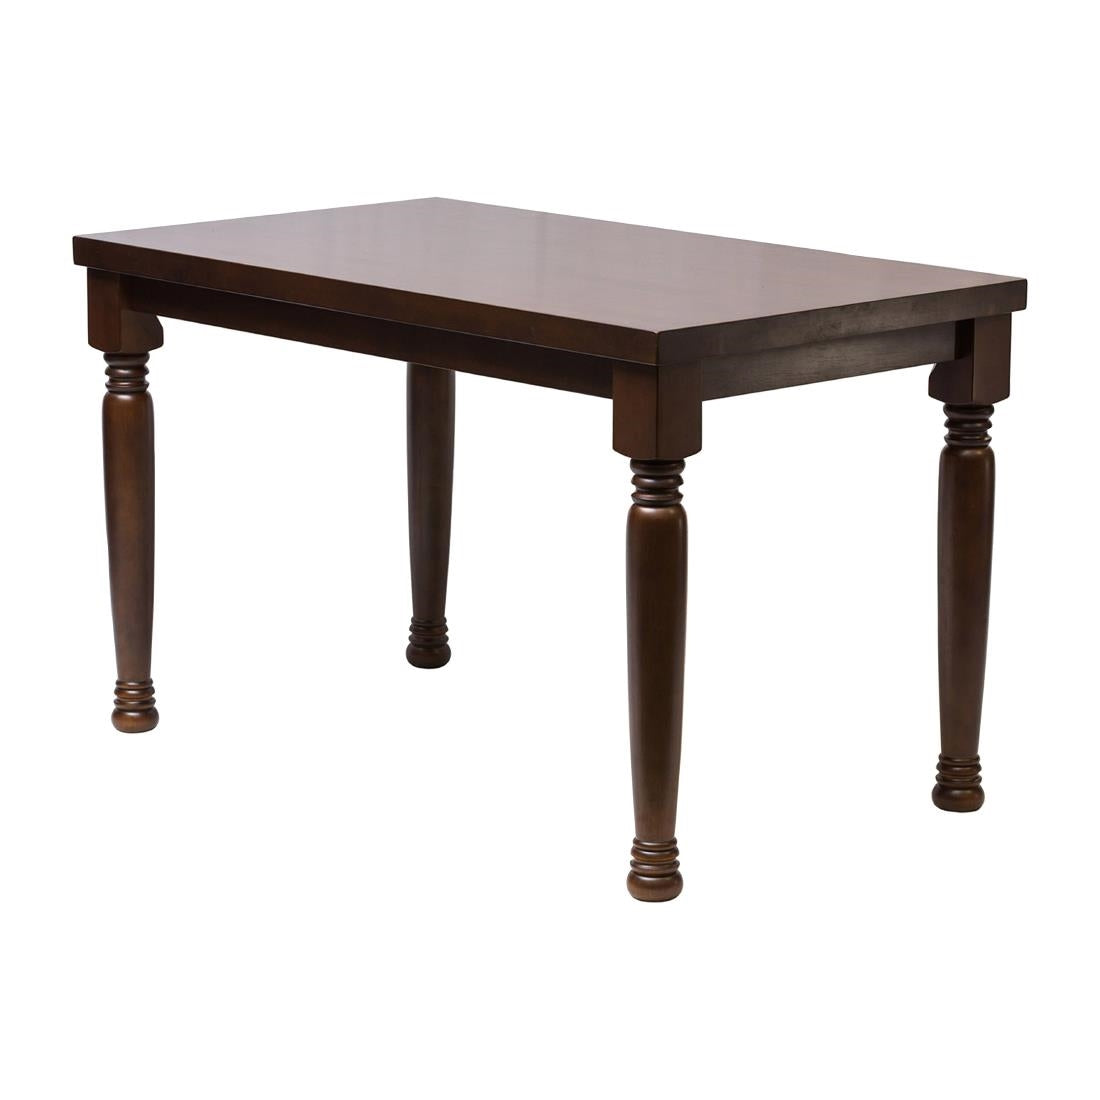 FT493 Cotswold Dark Wood Rectangular Dining Table 1200x700mm JD Catering Equipment Solutions Ltd